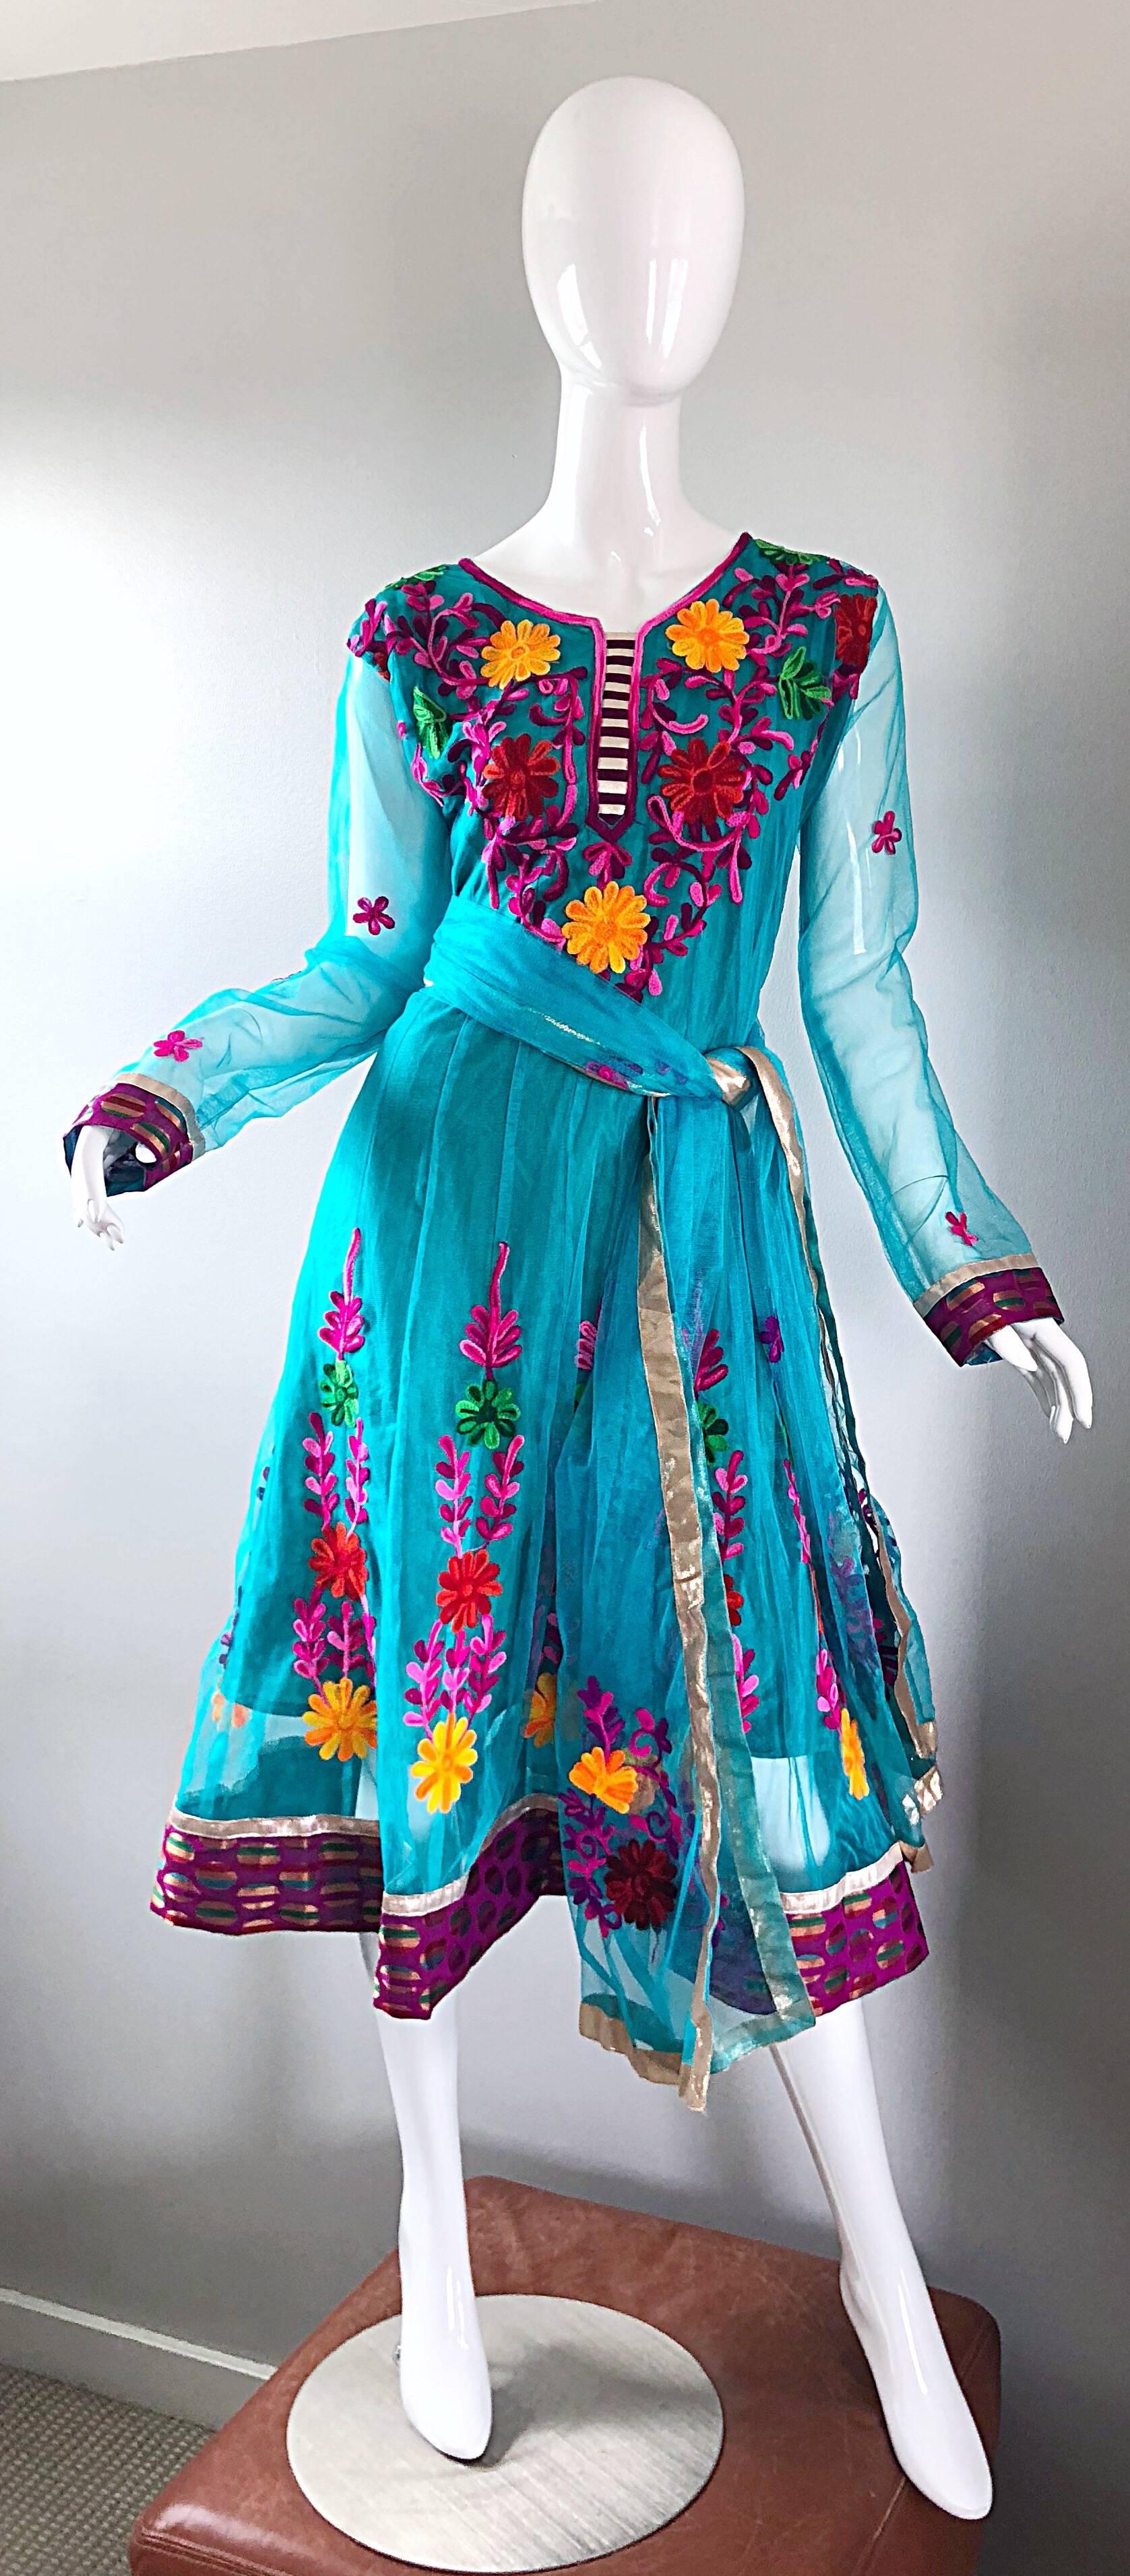 Gorgeous 1970s turquoise blue colorful embrodiered Indian boho kurta dress and sash belt! Features vibrant colored hand embrodiered flowers in fuchsia, purple, red, marigold yellow, pink, and green throughout. Gauze overlay with semi-sheer long